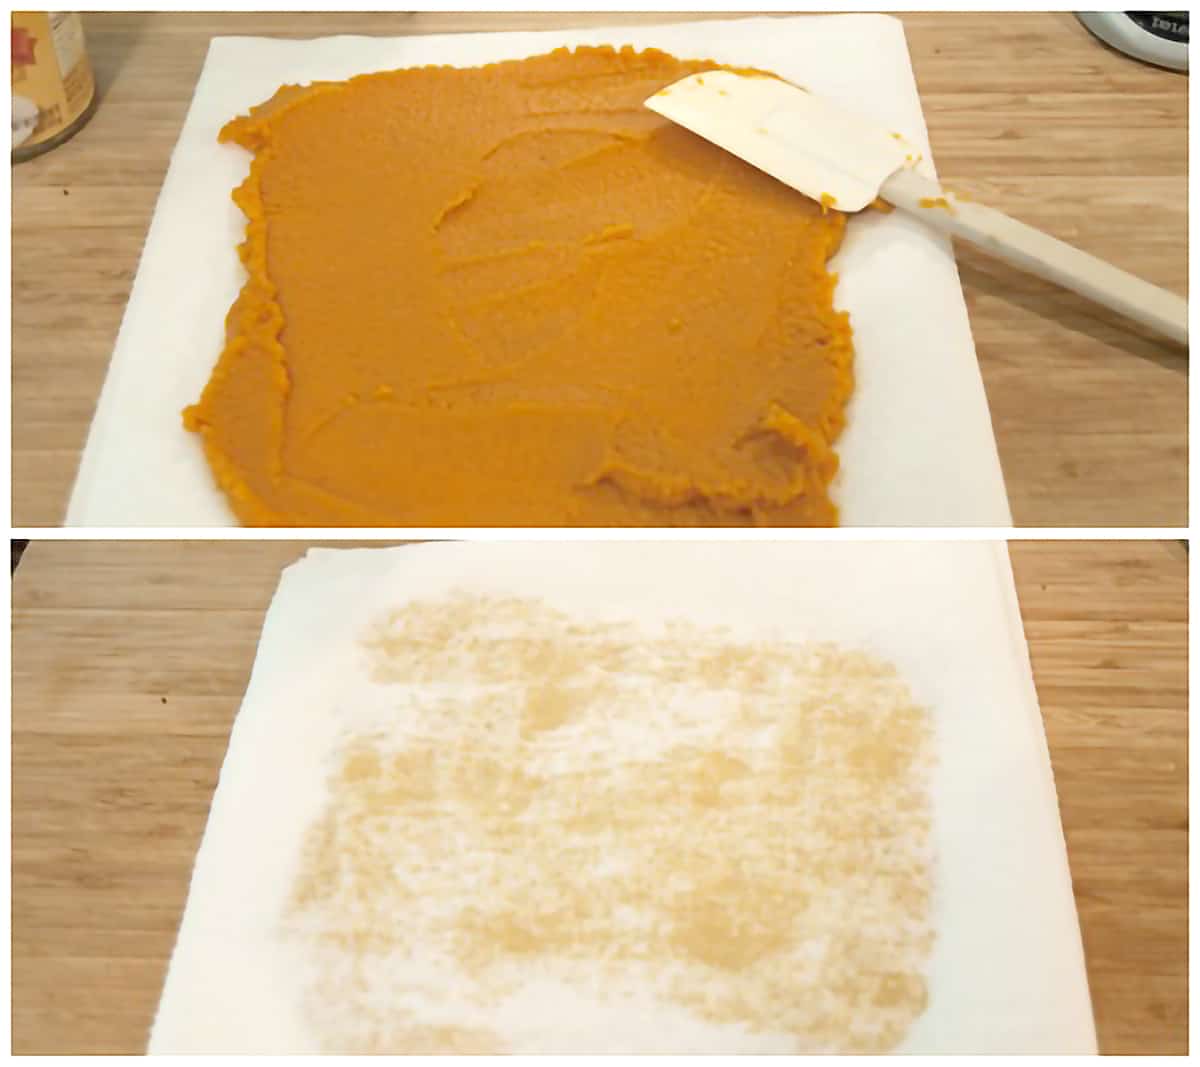 Canned pumpkin draining on paper towels.